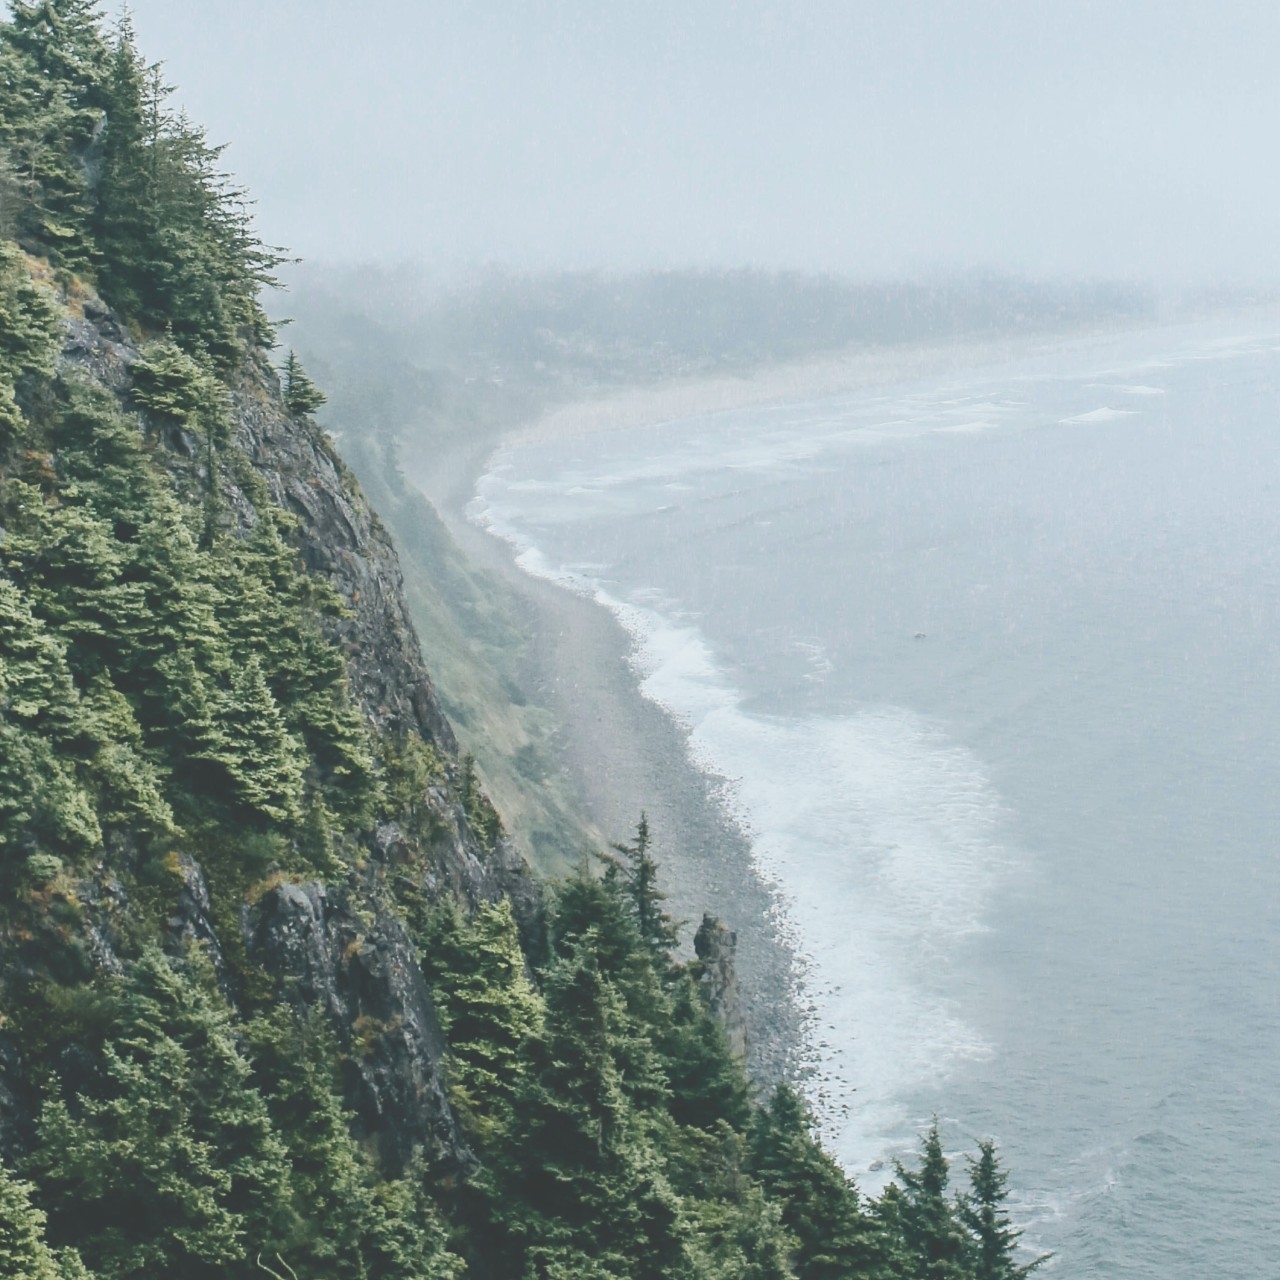 Waves crashing against a shoreline on a misty day with trees in the foreground